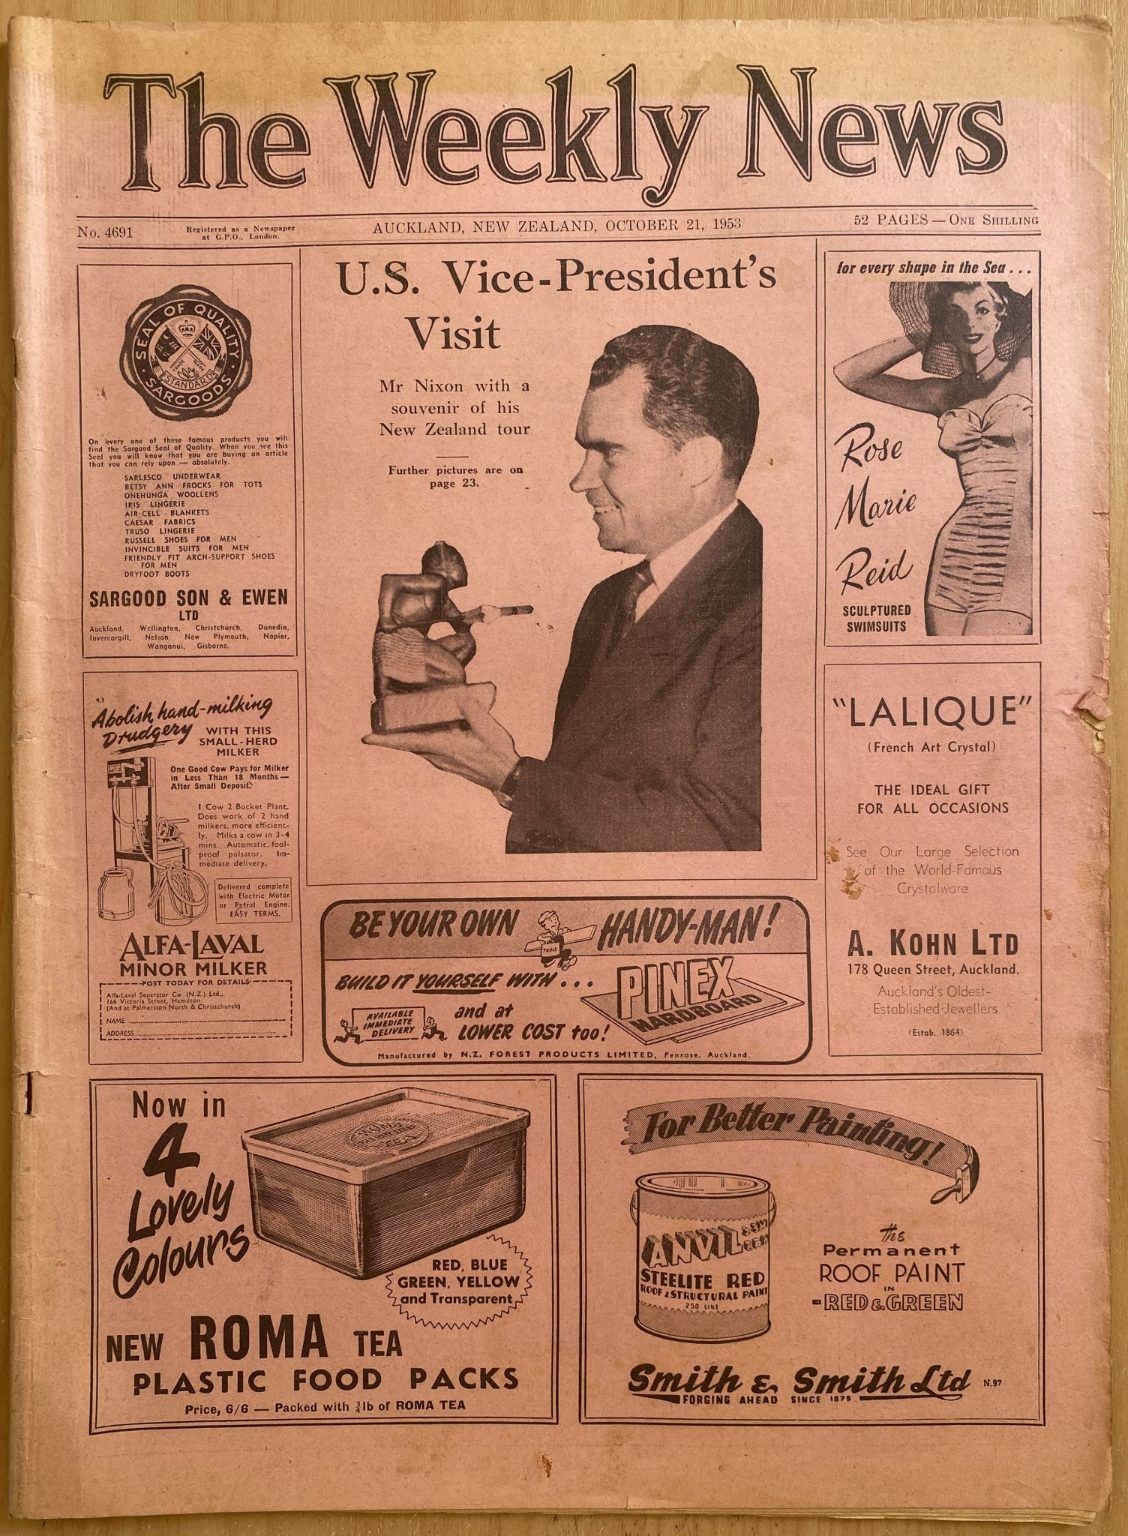 OLD NEWSPAPER: The Weekly News - No. 4691, 21 October 1953